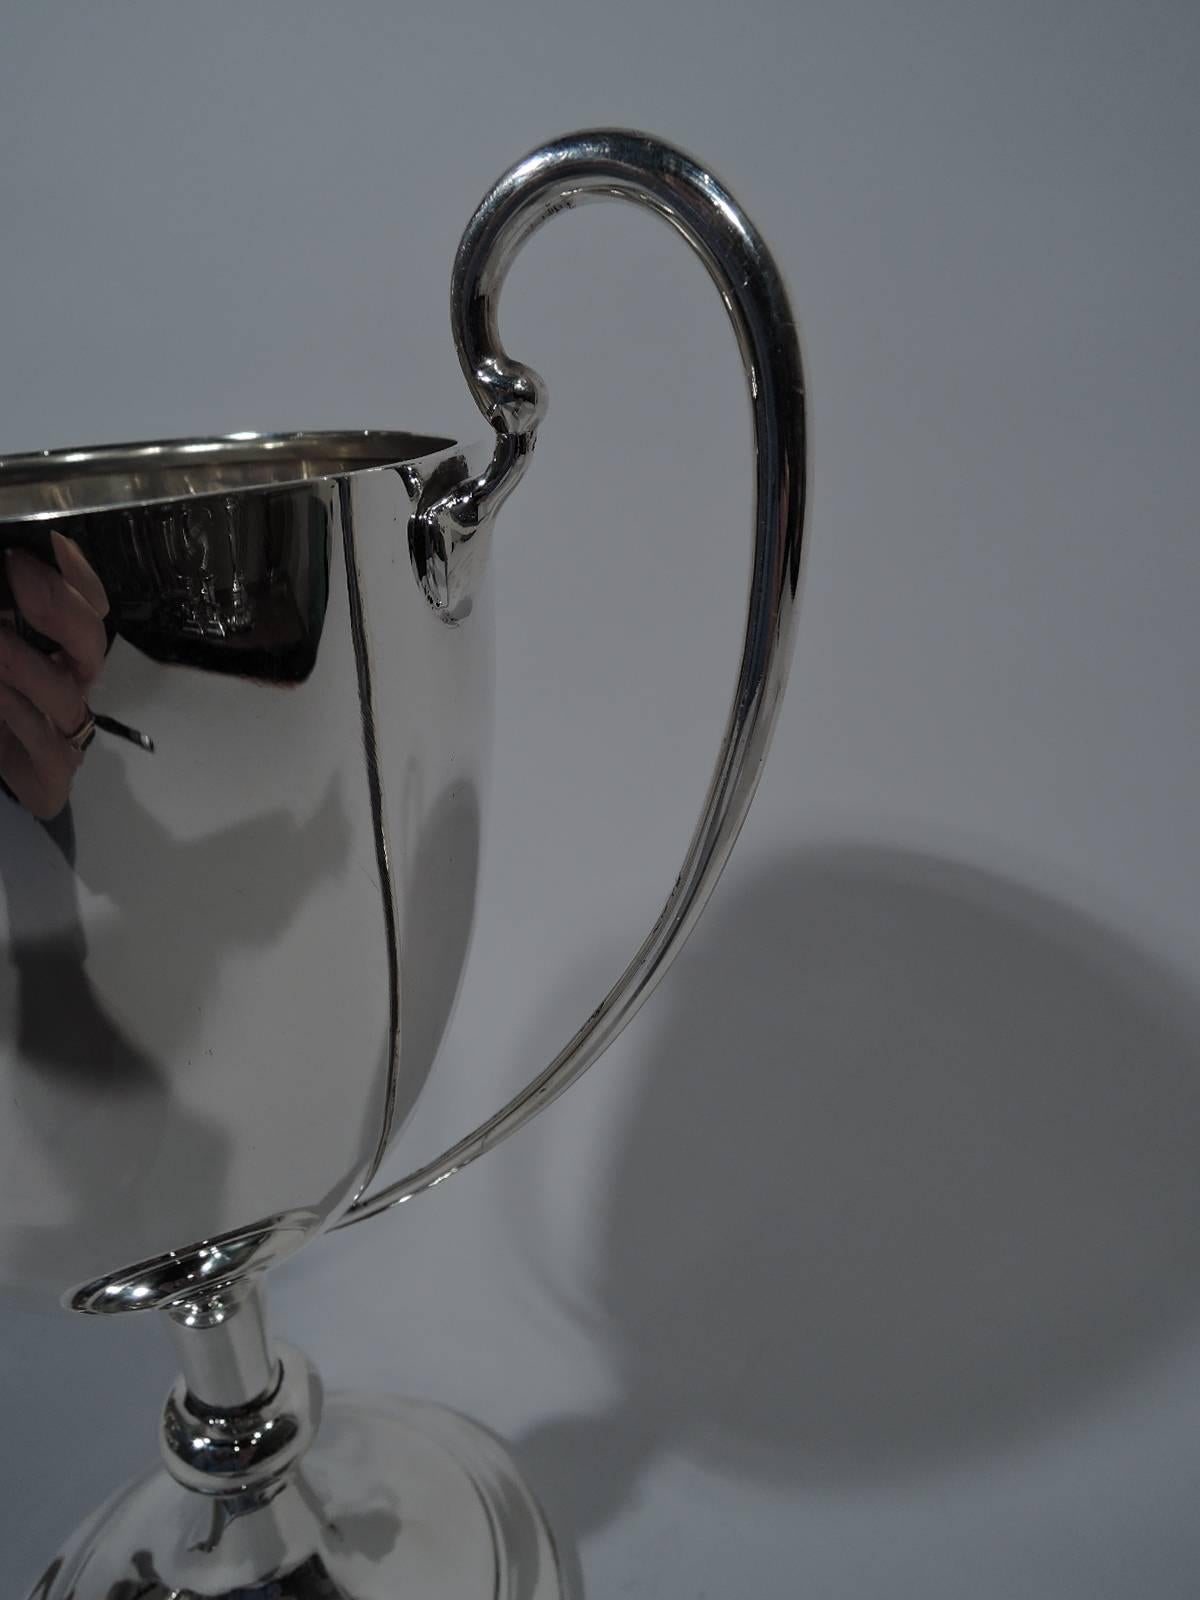 George V sterling silver trophy cup. Made by Barker Bros, Ltd in Birmingham in 1932. Ovoid bowl with high-looping scroll handles, knopped cylindrical stem, and stepped foot. A classic design with plenty of room for engraving. Hallmarked. Weight: 11